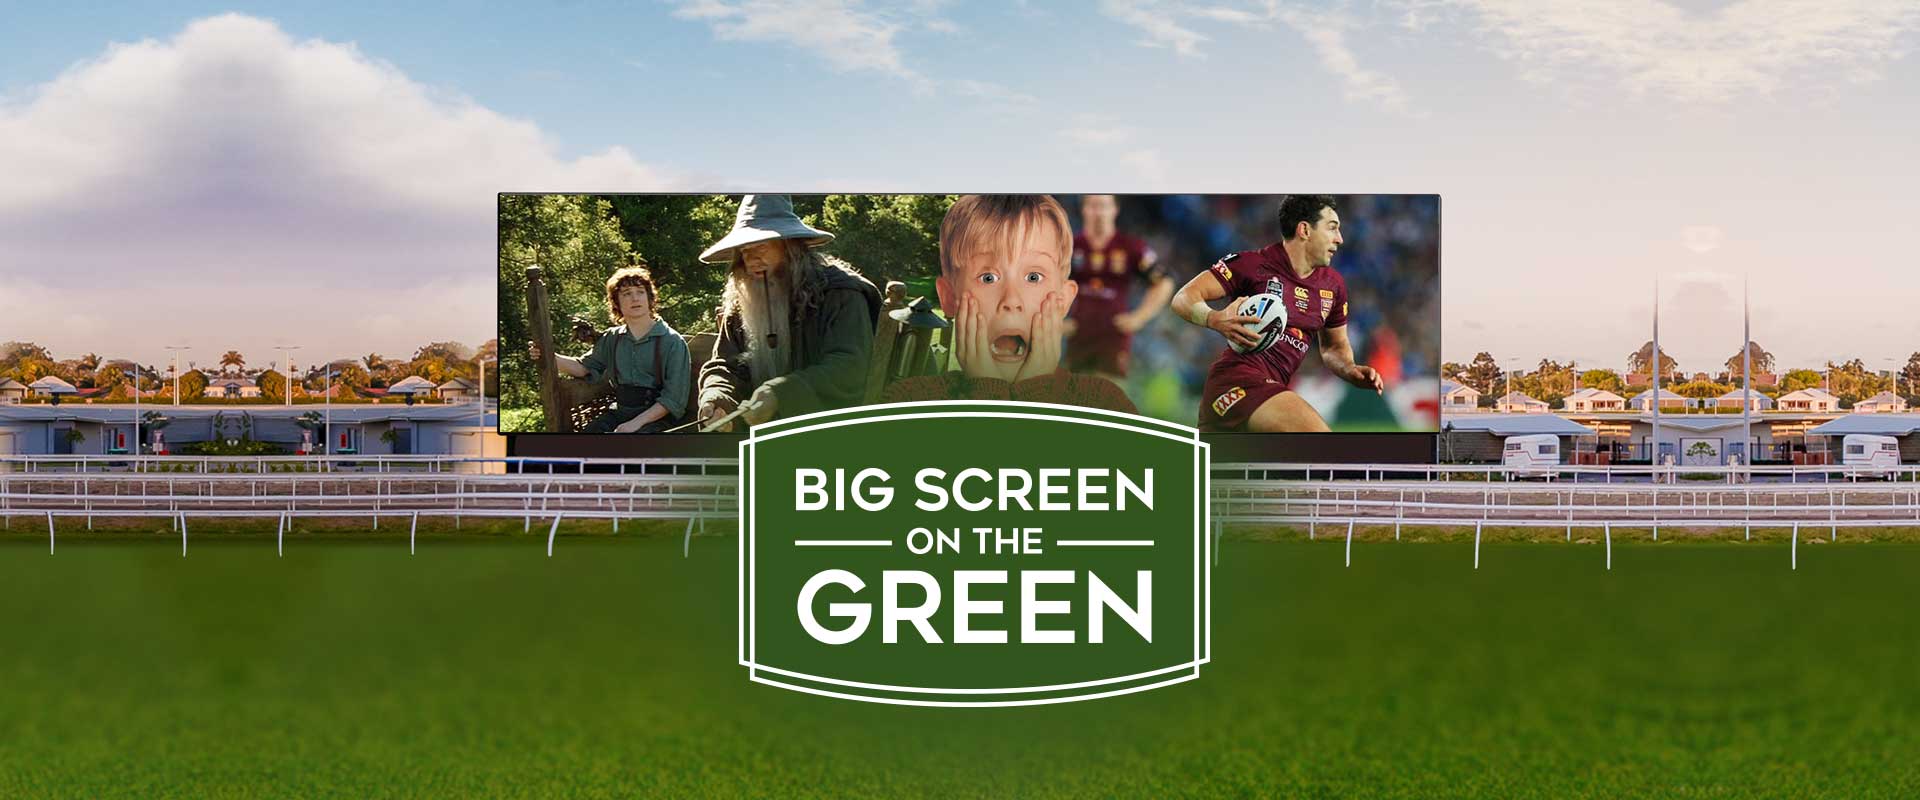 Big Screen On The Green Background_Page Banner